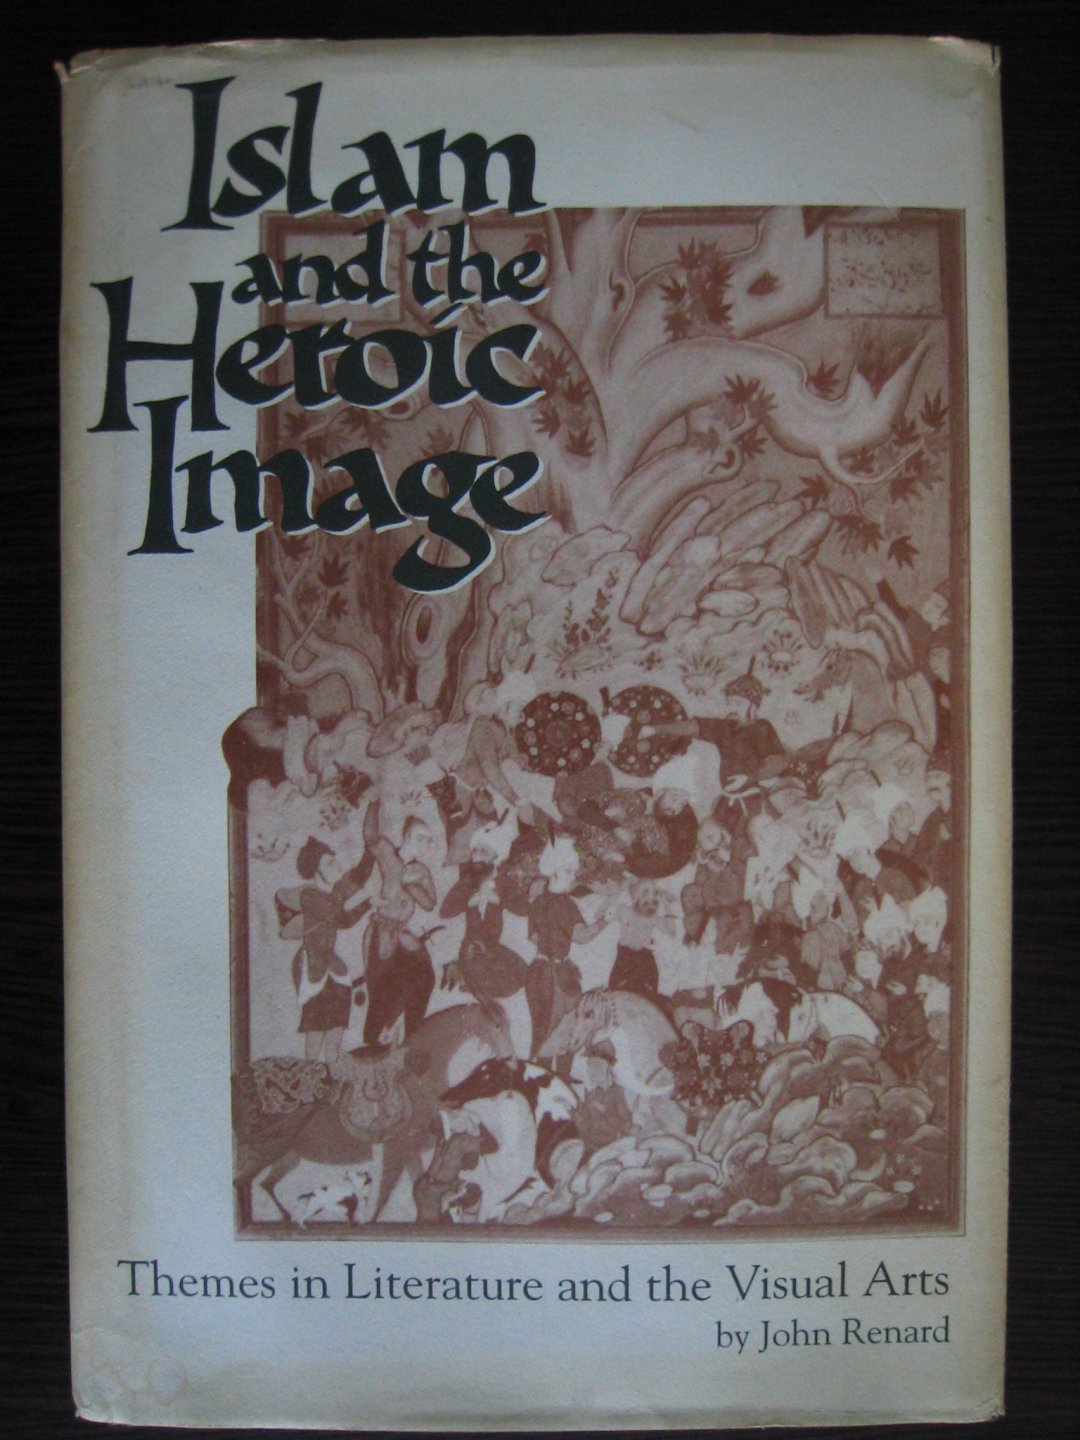 Renard, John - Islam and the Heroic Image / Themes in Literature and the Visual Arts.